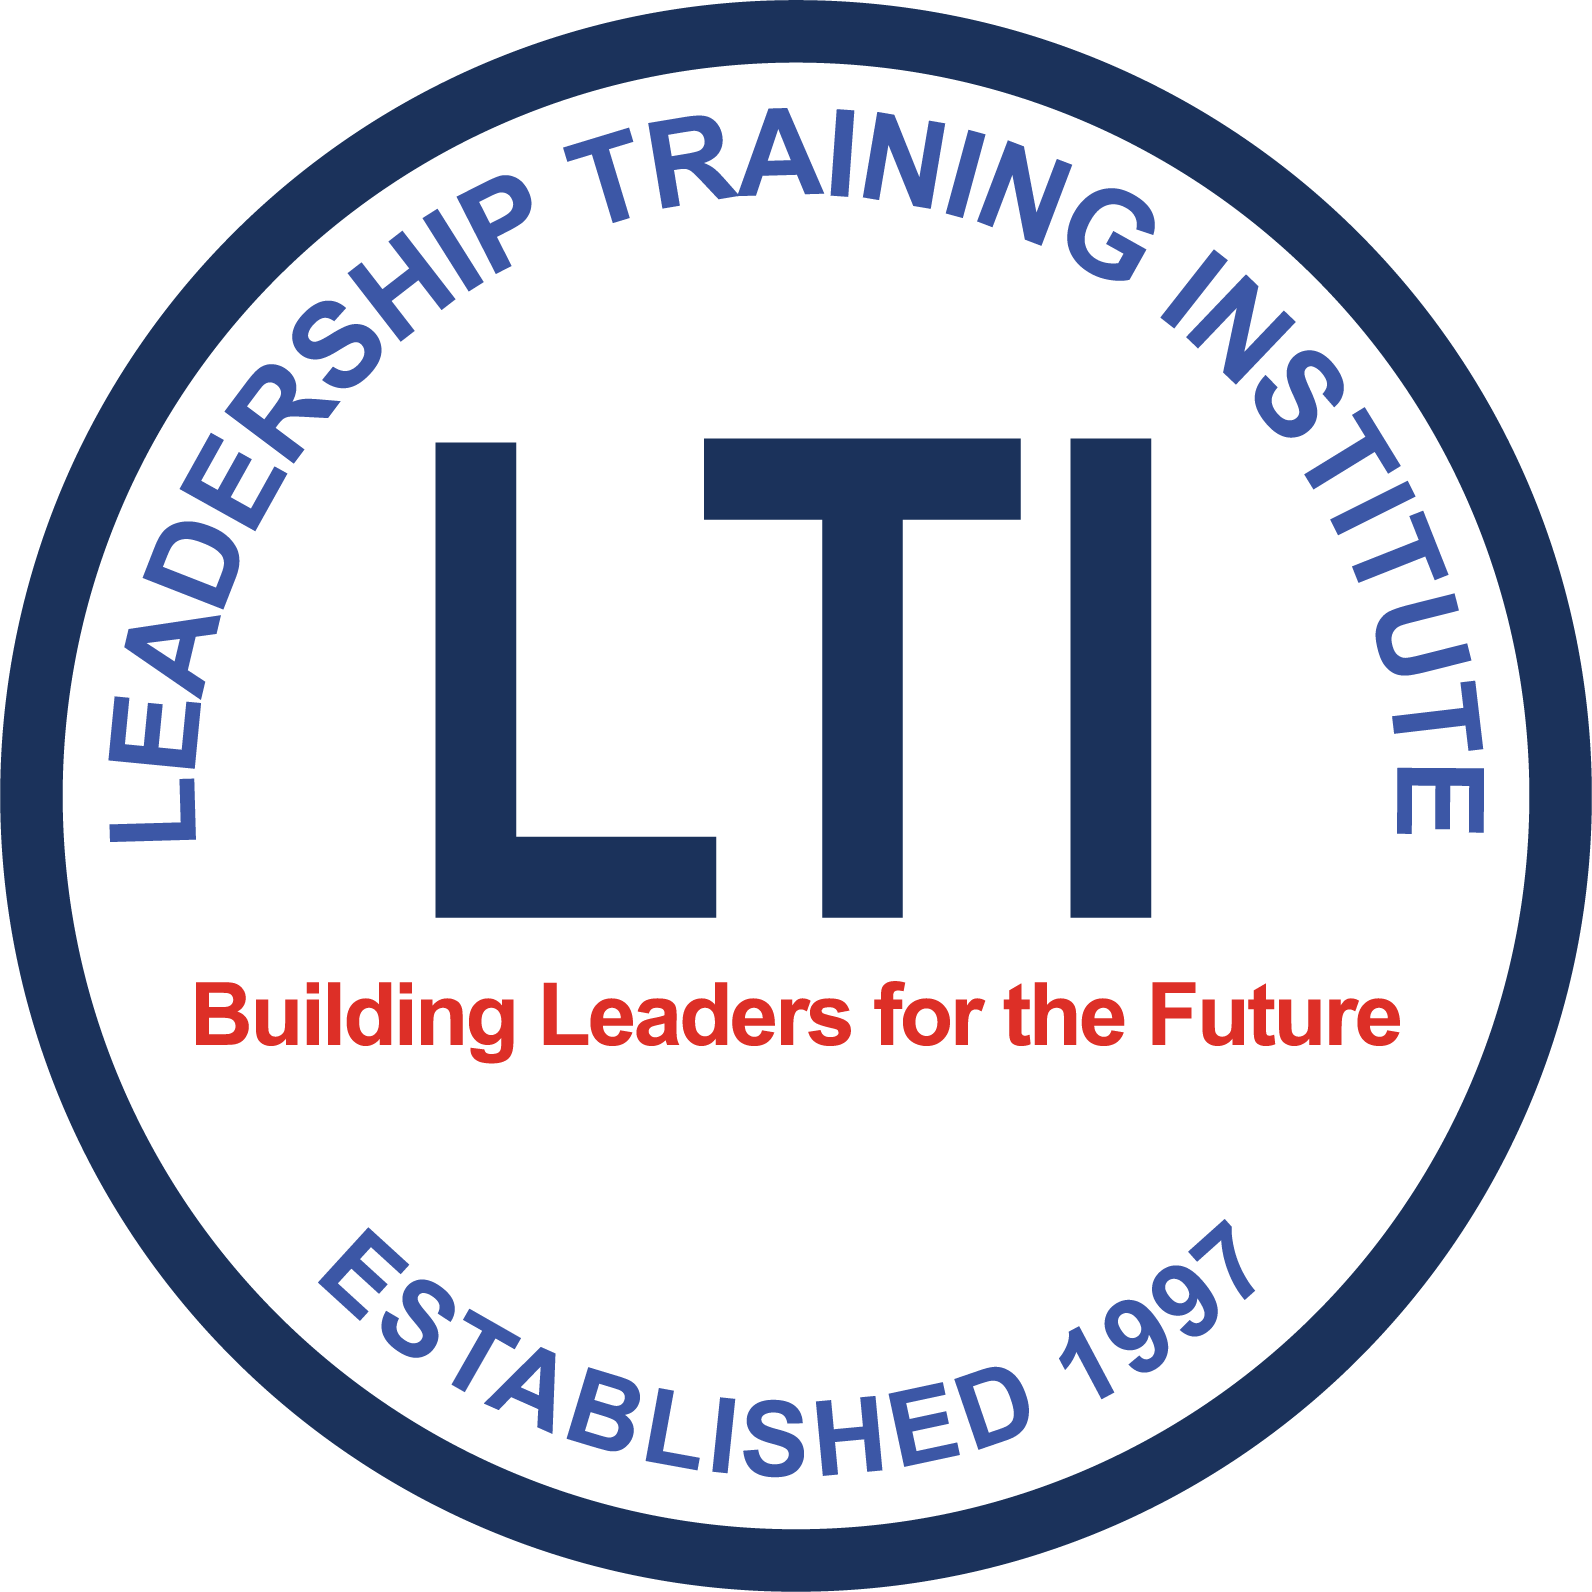 Leadership Training Institute - Building Leaders for the Future